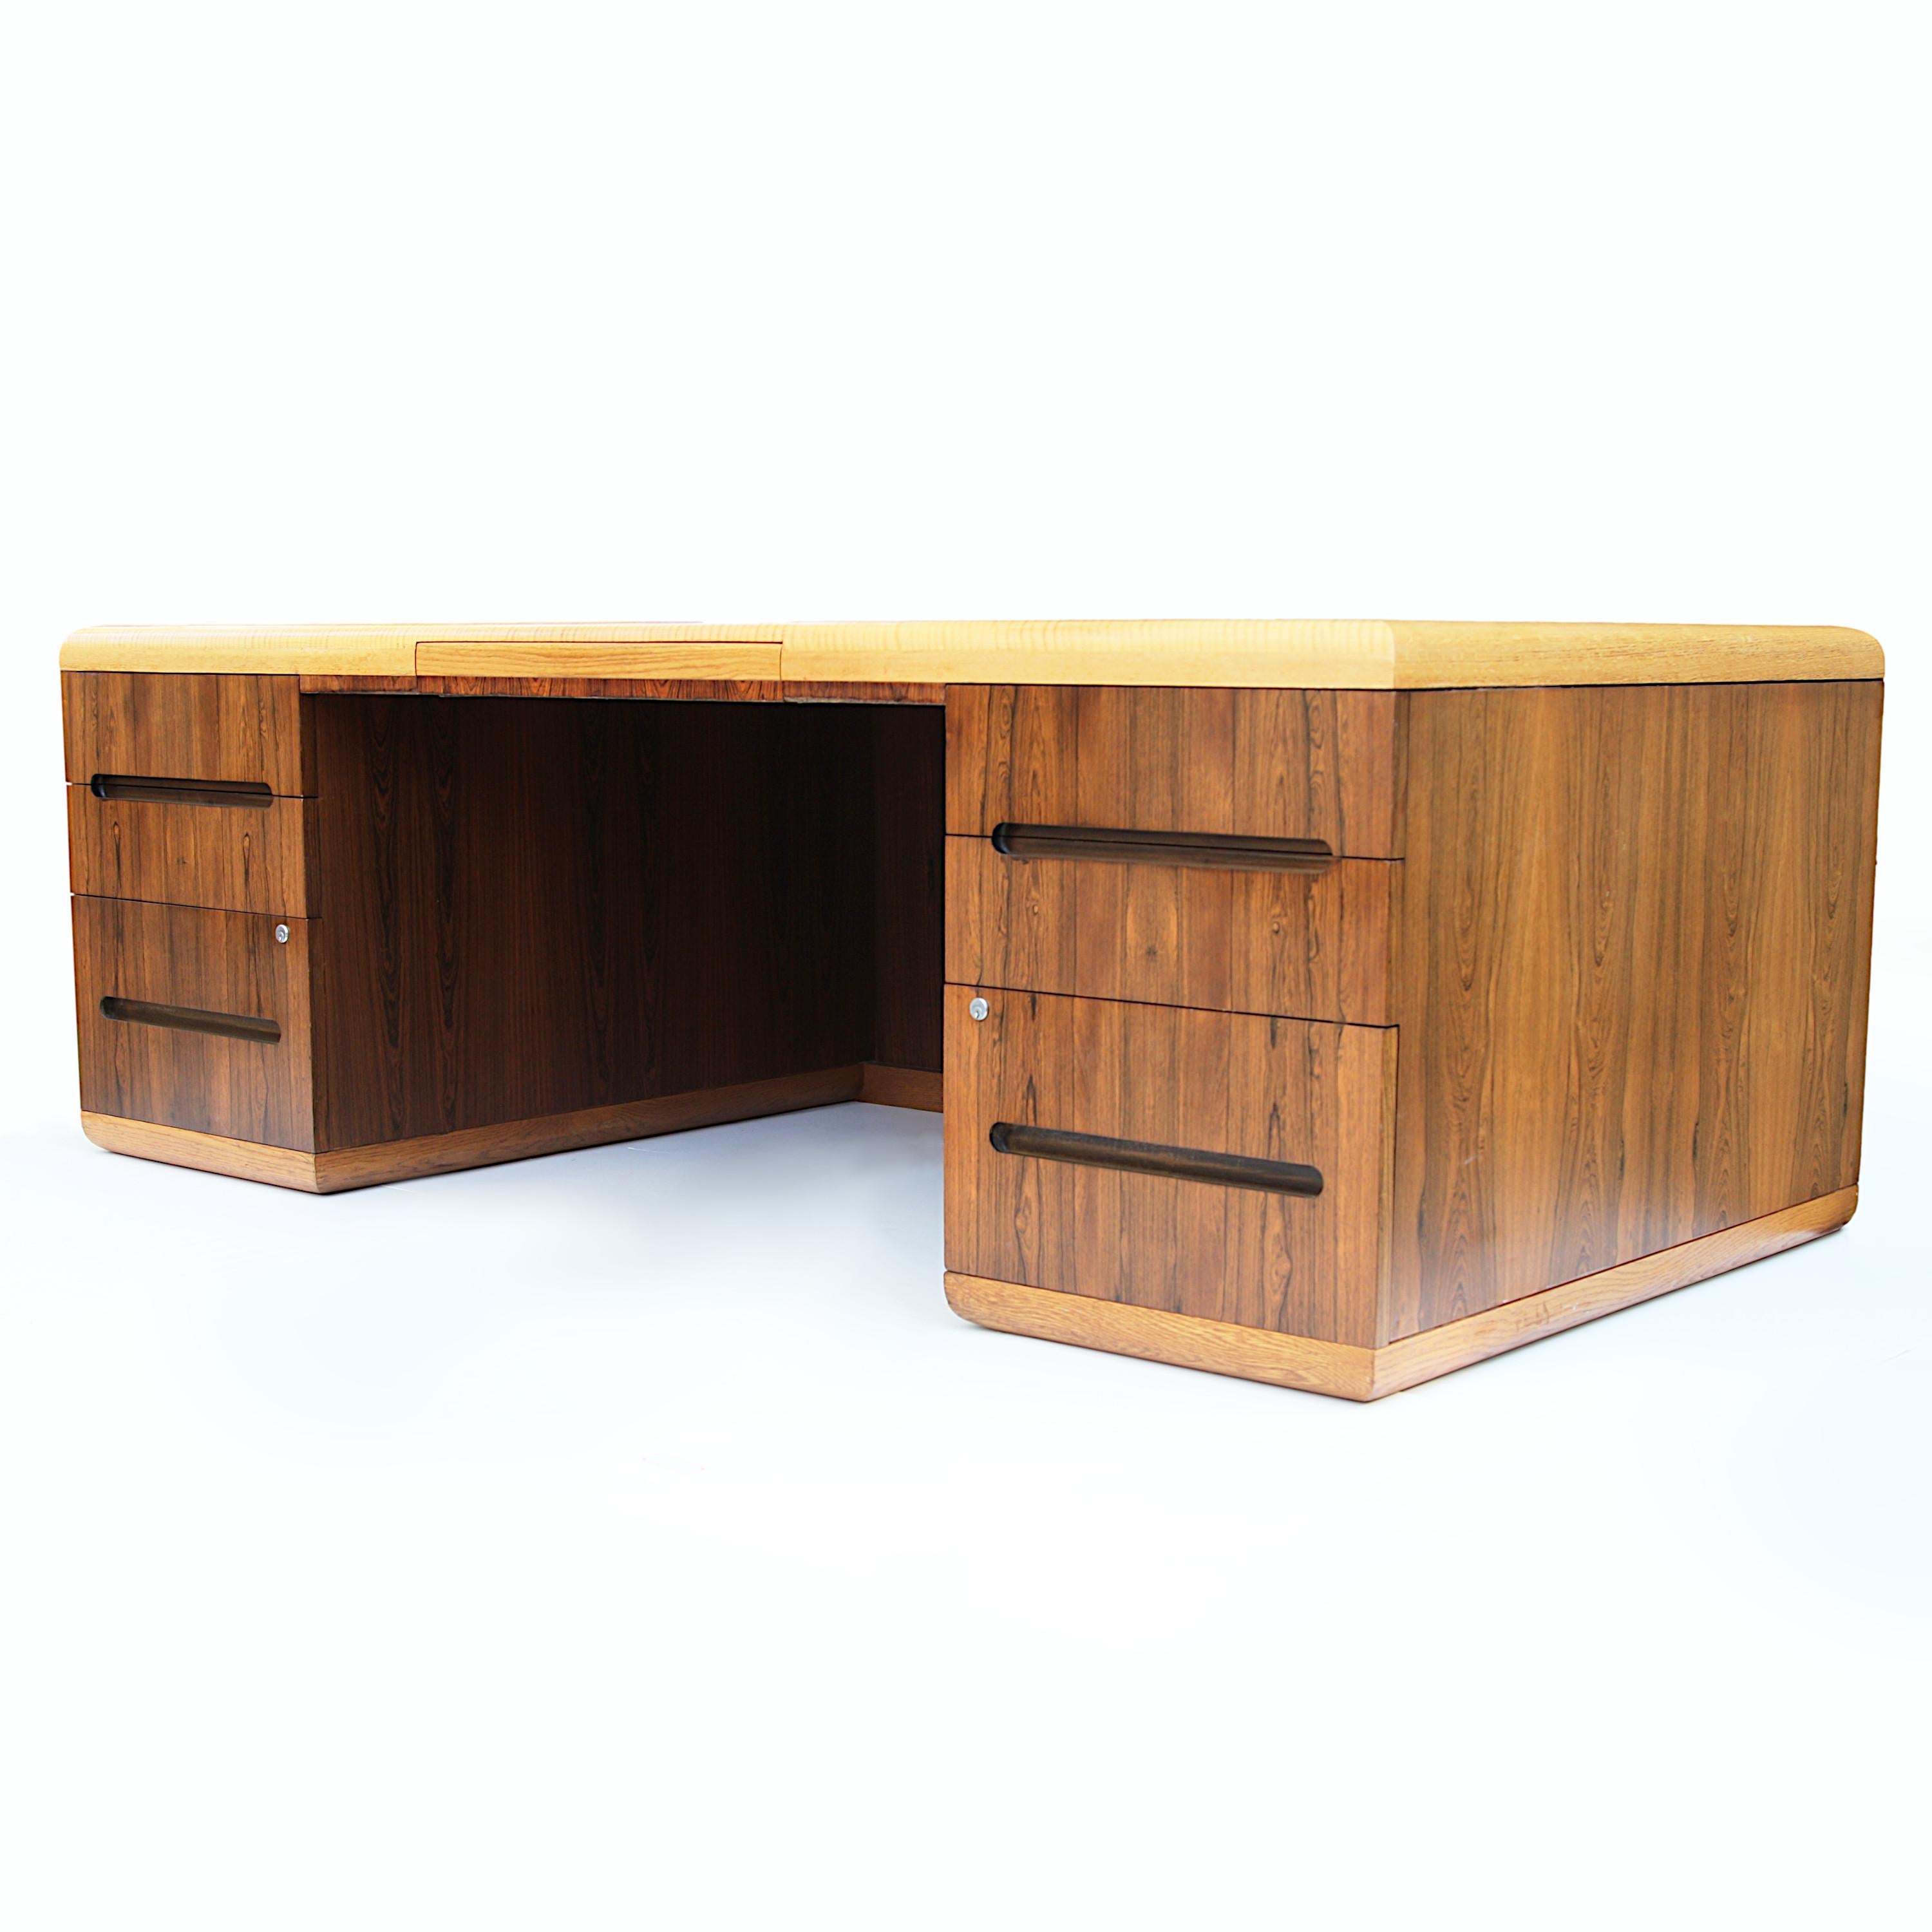 This beautifully-made executive desk features a design reminiscent of Roger Sprunger  and the unparalleled build-quality for which Dunbar is renowned. The clean, Minimalist lines are complemented by the contrasting oak and rosewood veneers. With its